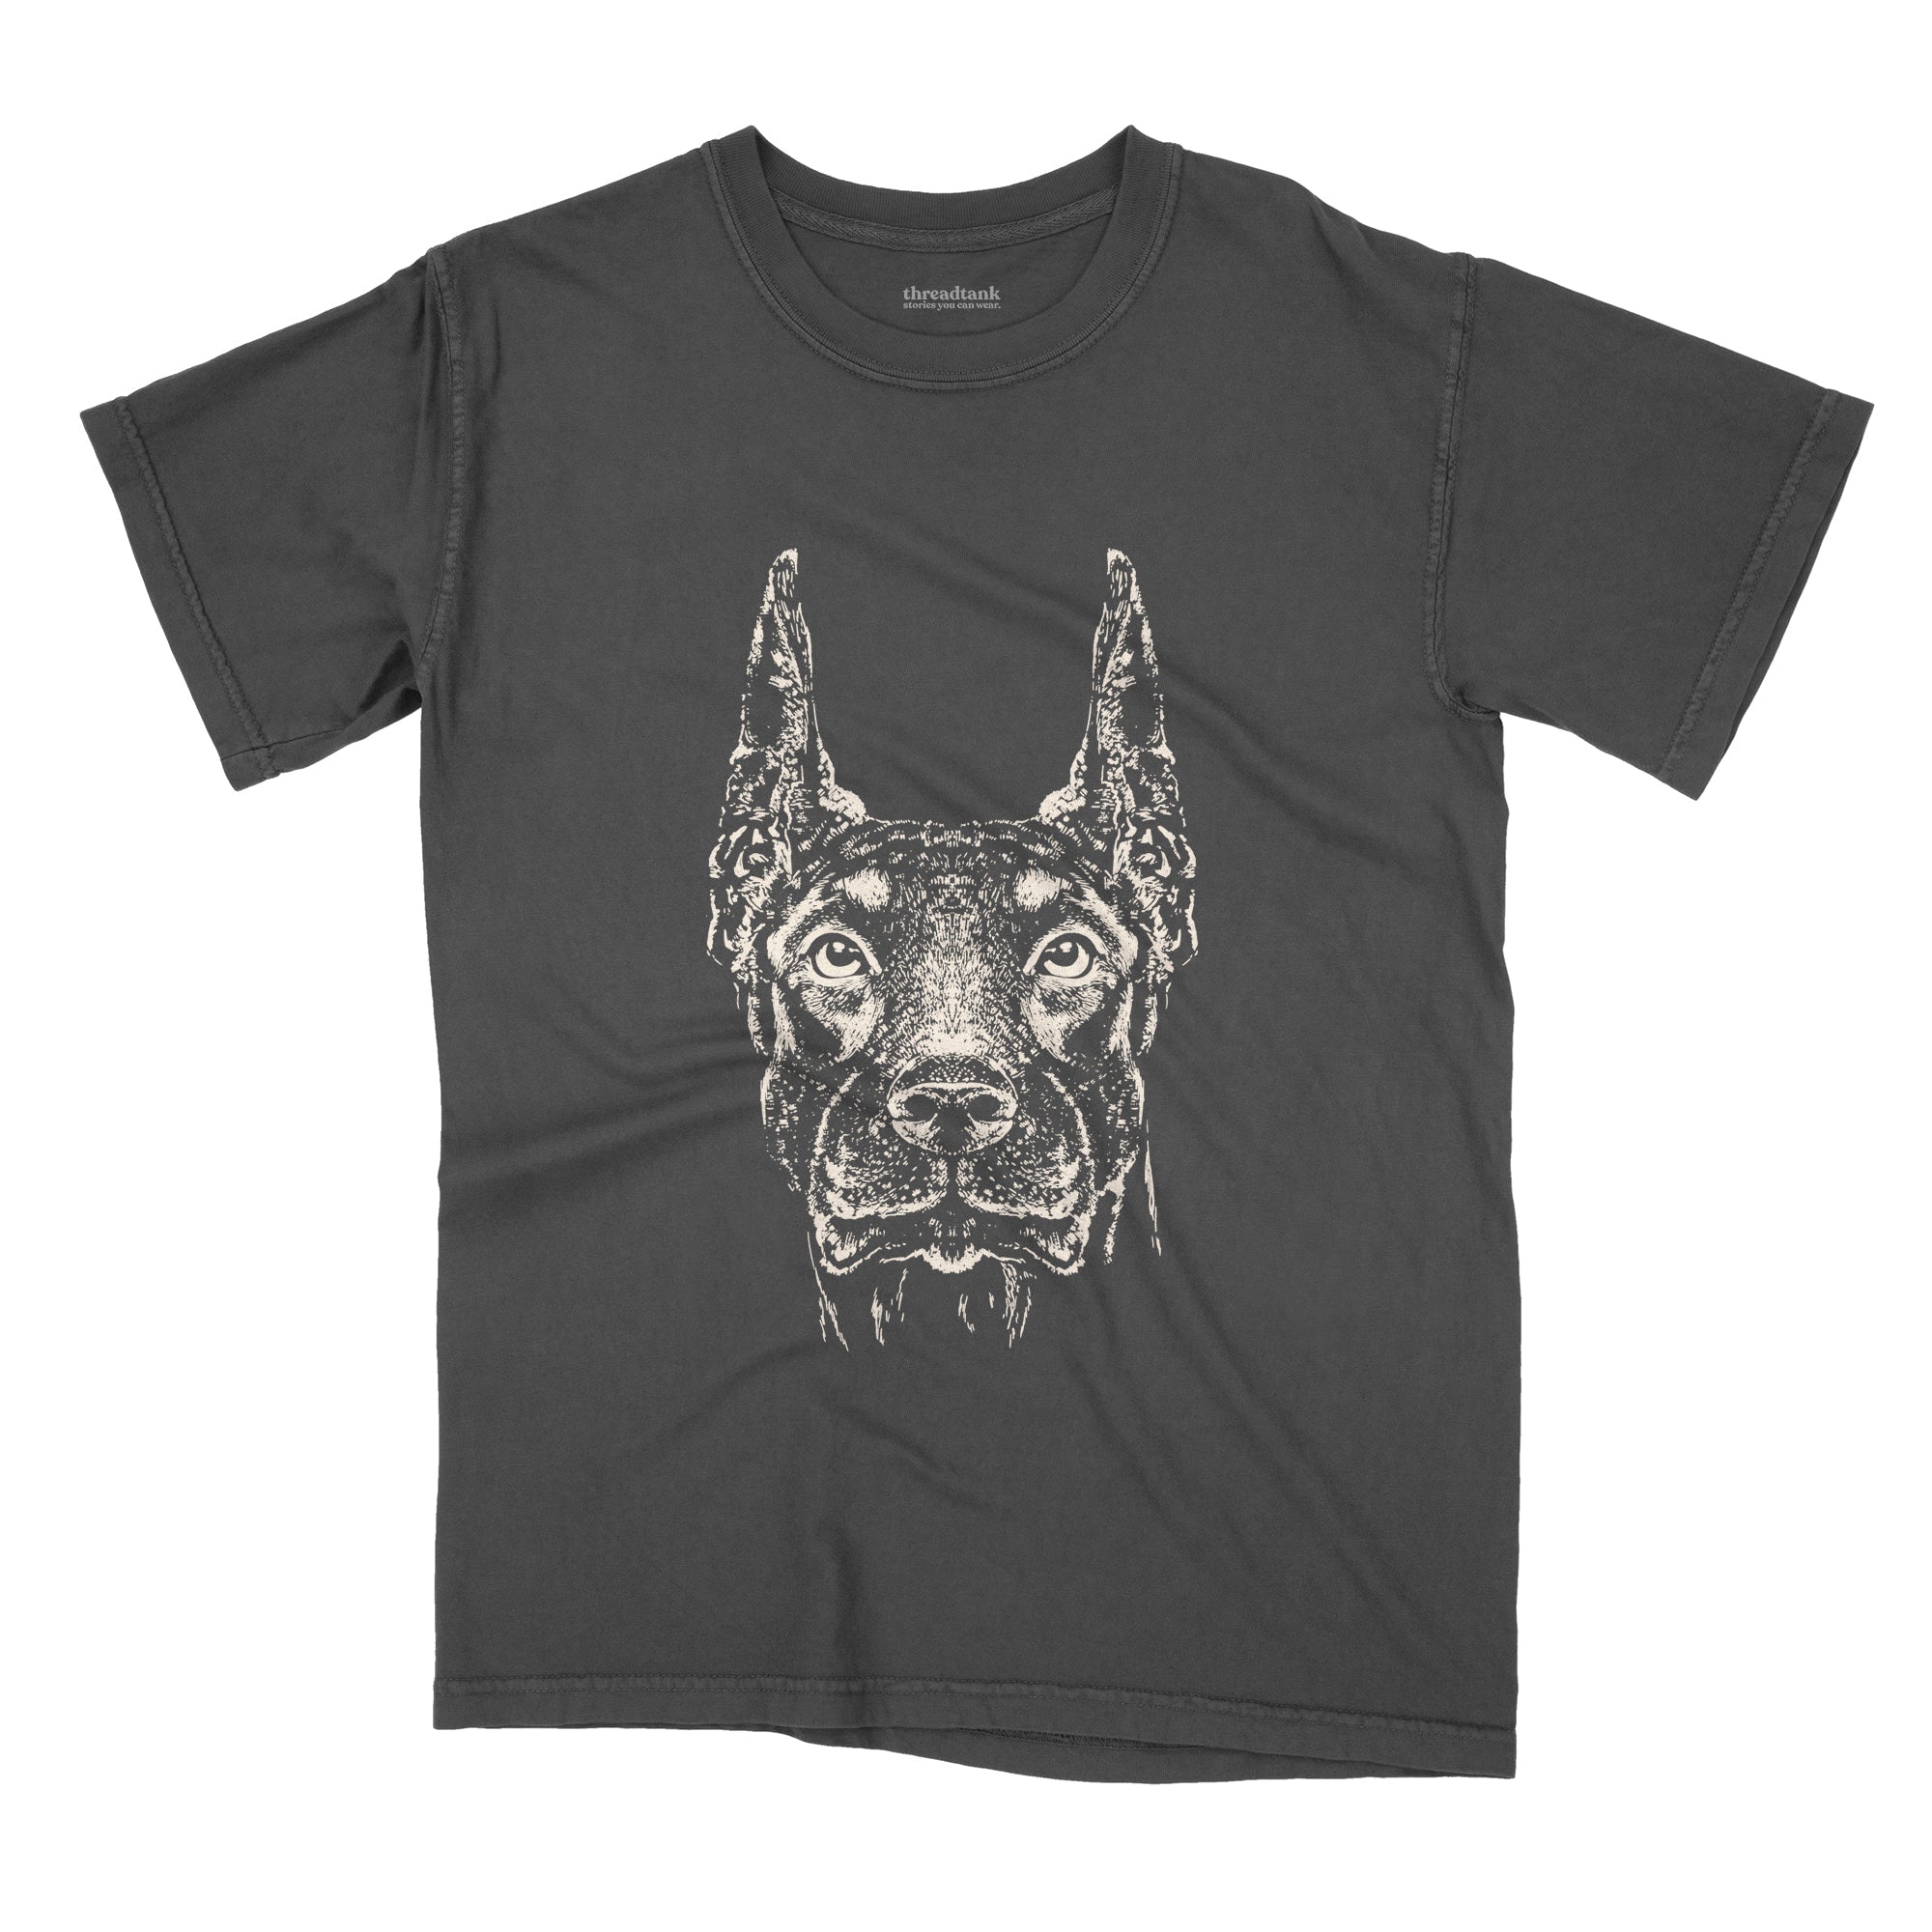 Doberman Dog Sketch Garment-Dyed Tee - Stories You Can Wear